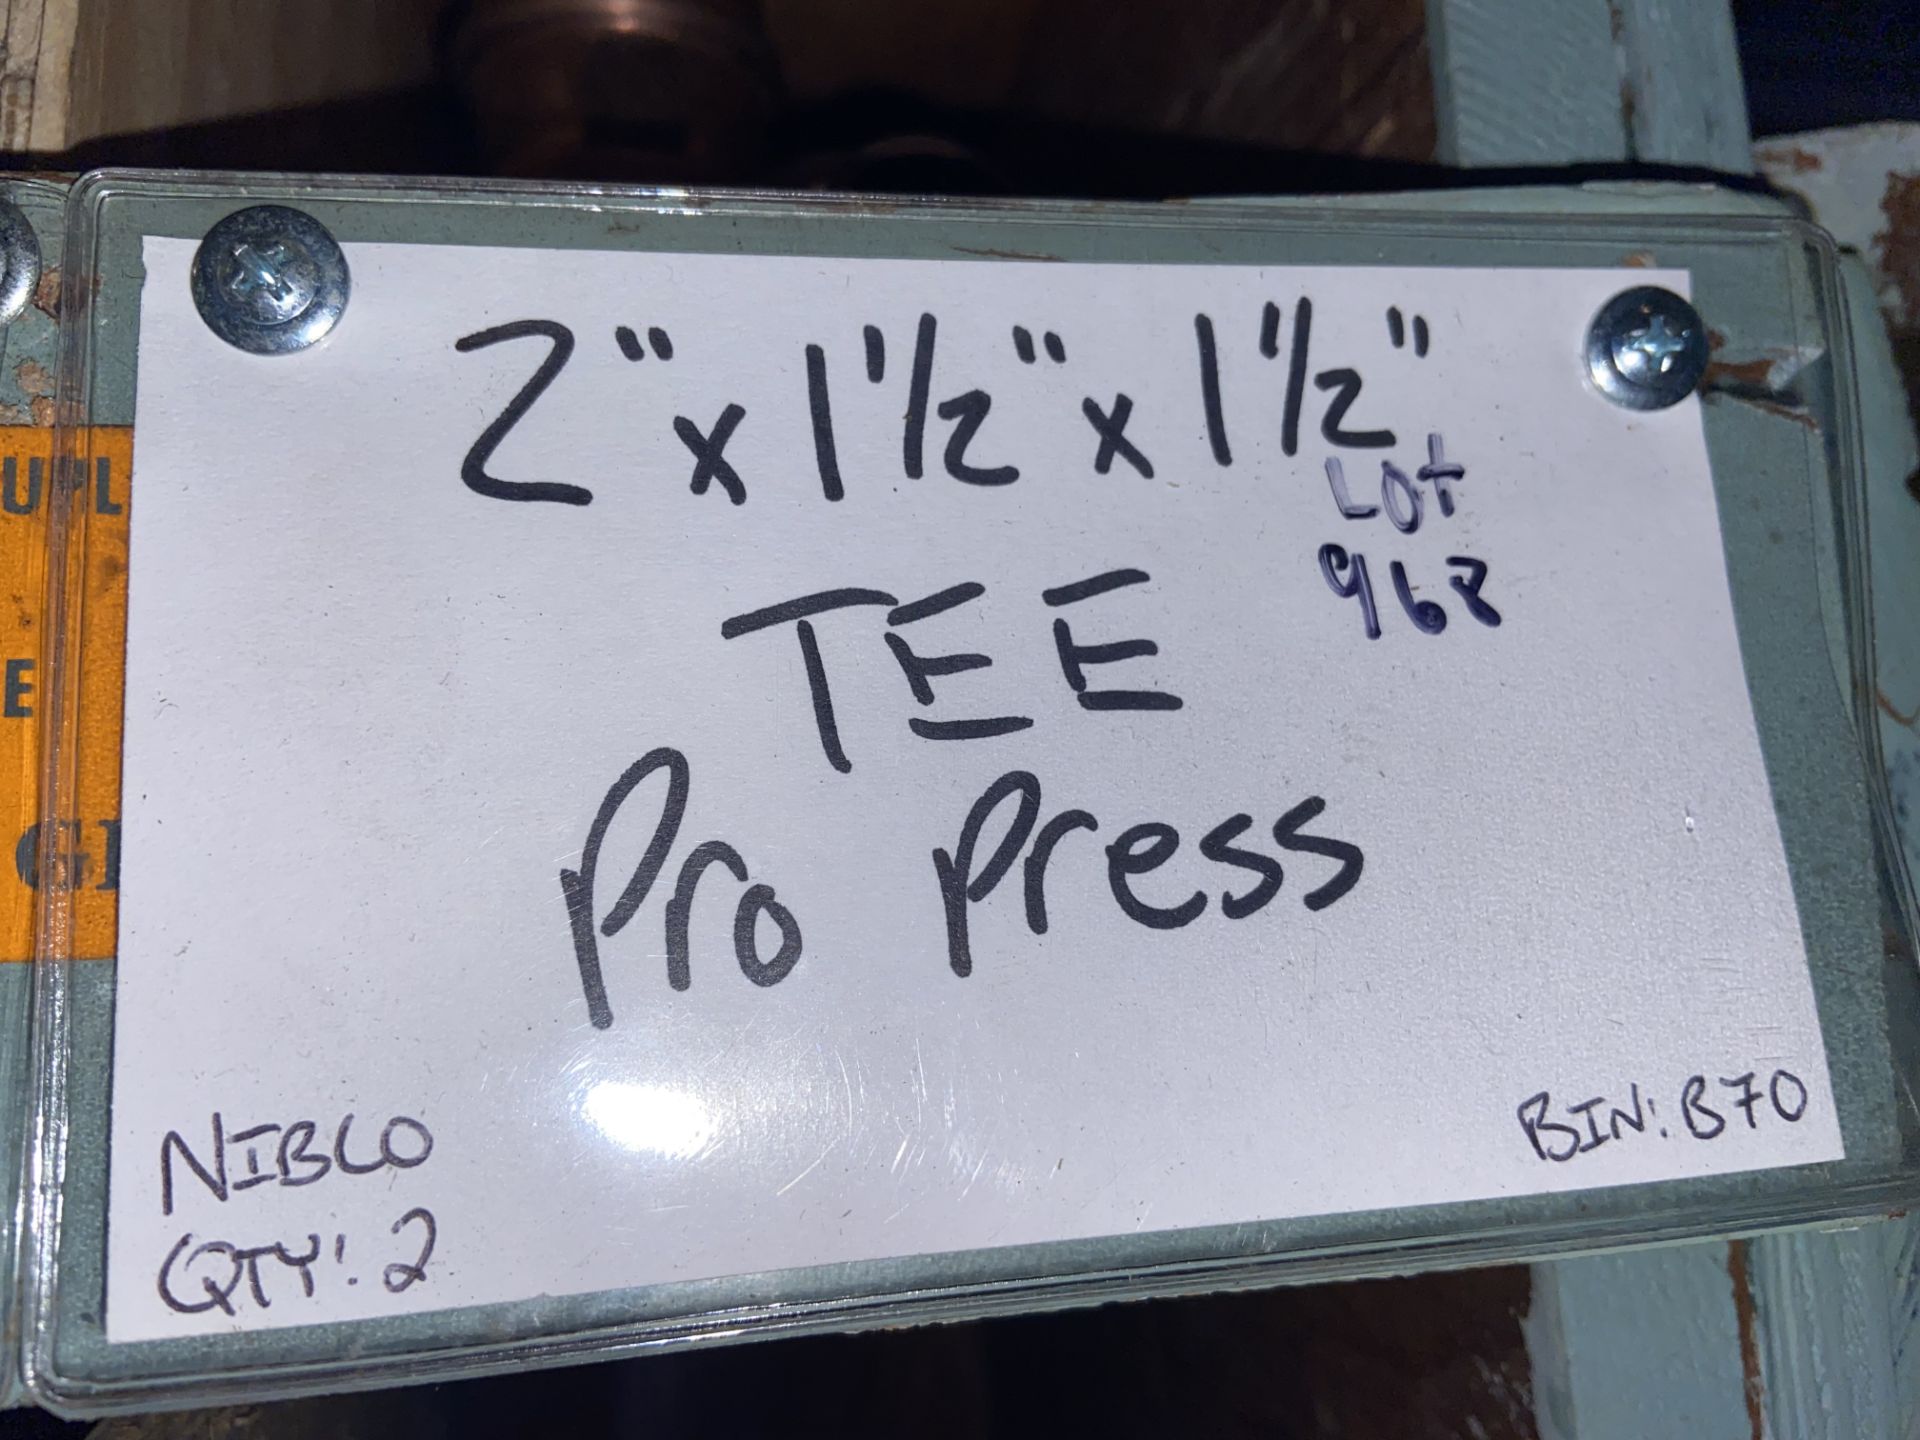 NIBCO(2) 2”x1/2”1/2” Tee Pro Press (LOCATED IN MONROEVILLE, PA) - Image 2 of 2